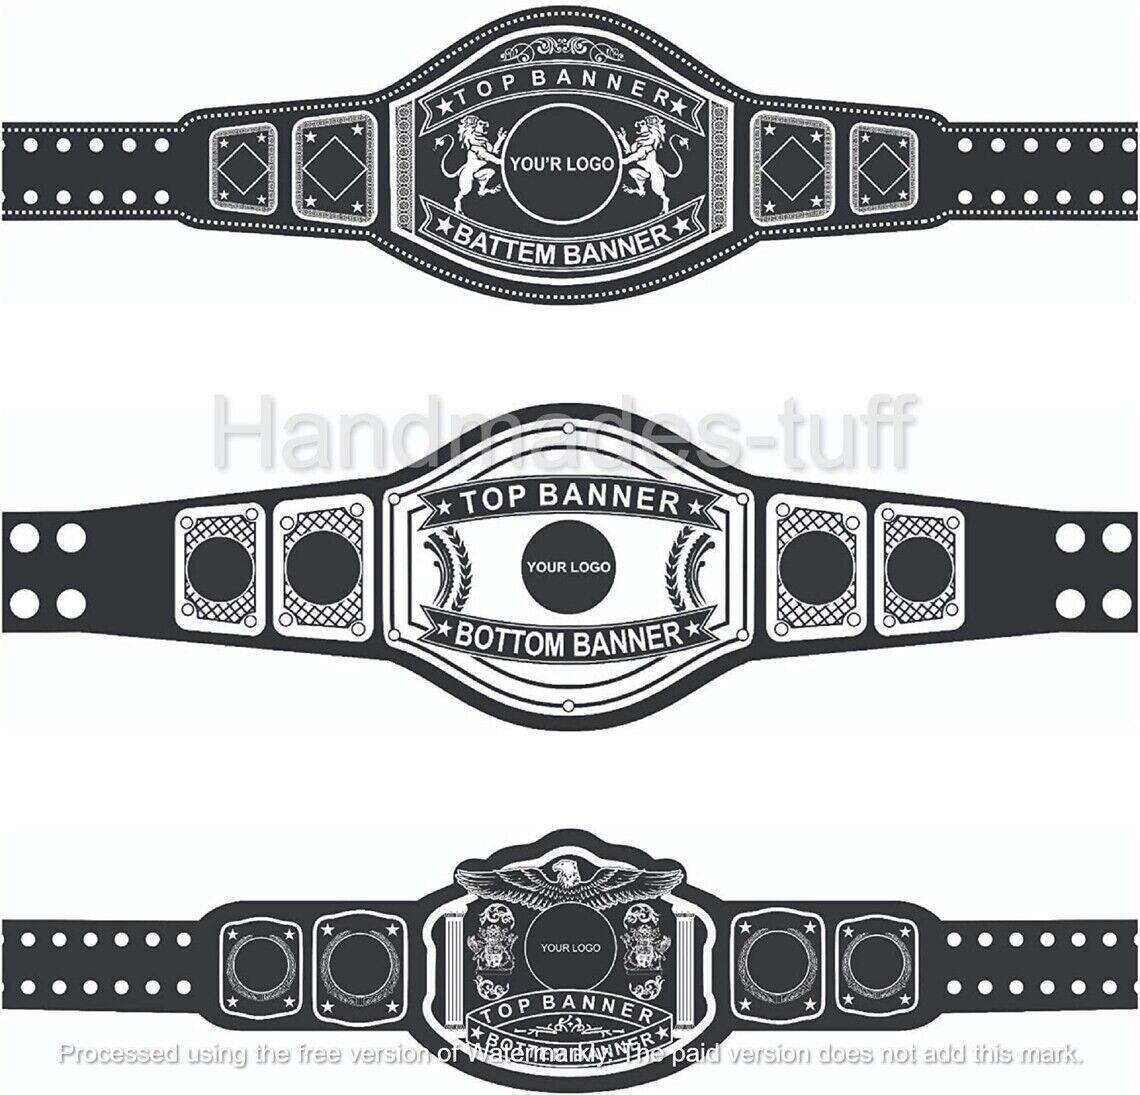 Customize Title Belt Customize your belt according to your need. 4mm Plates